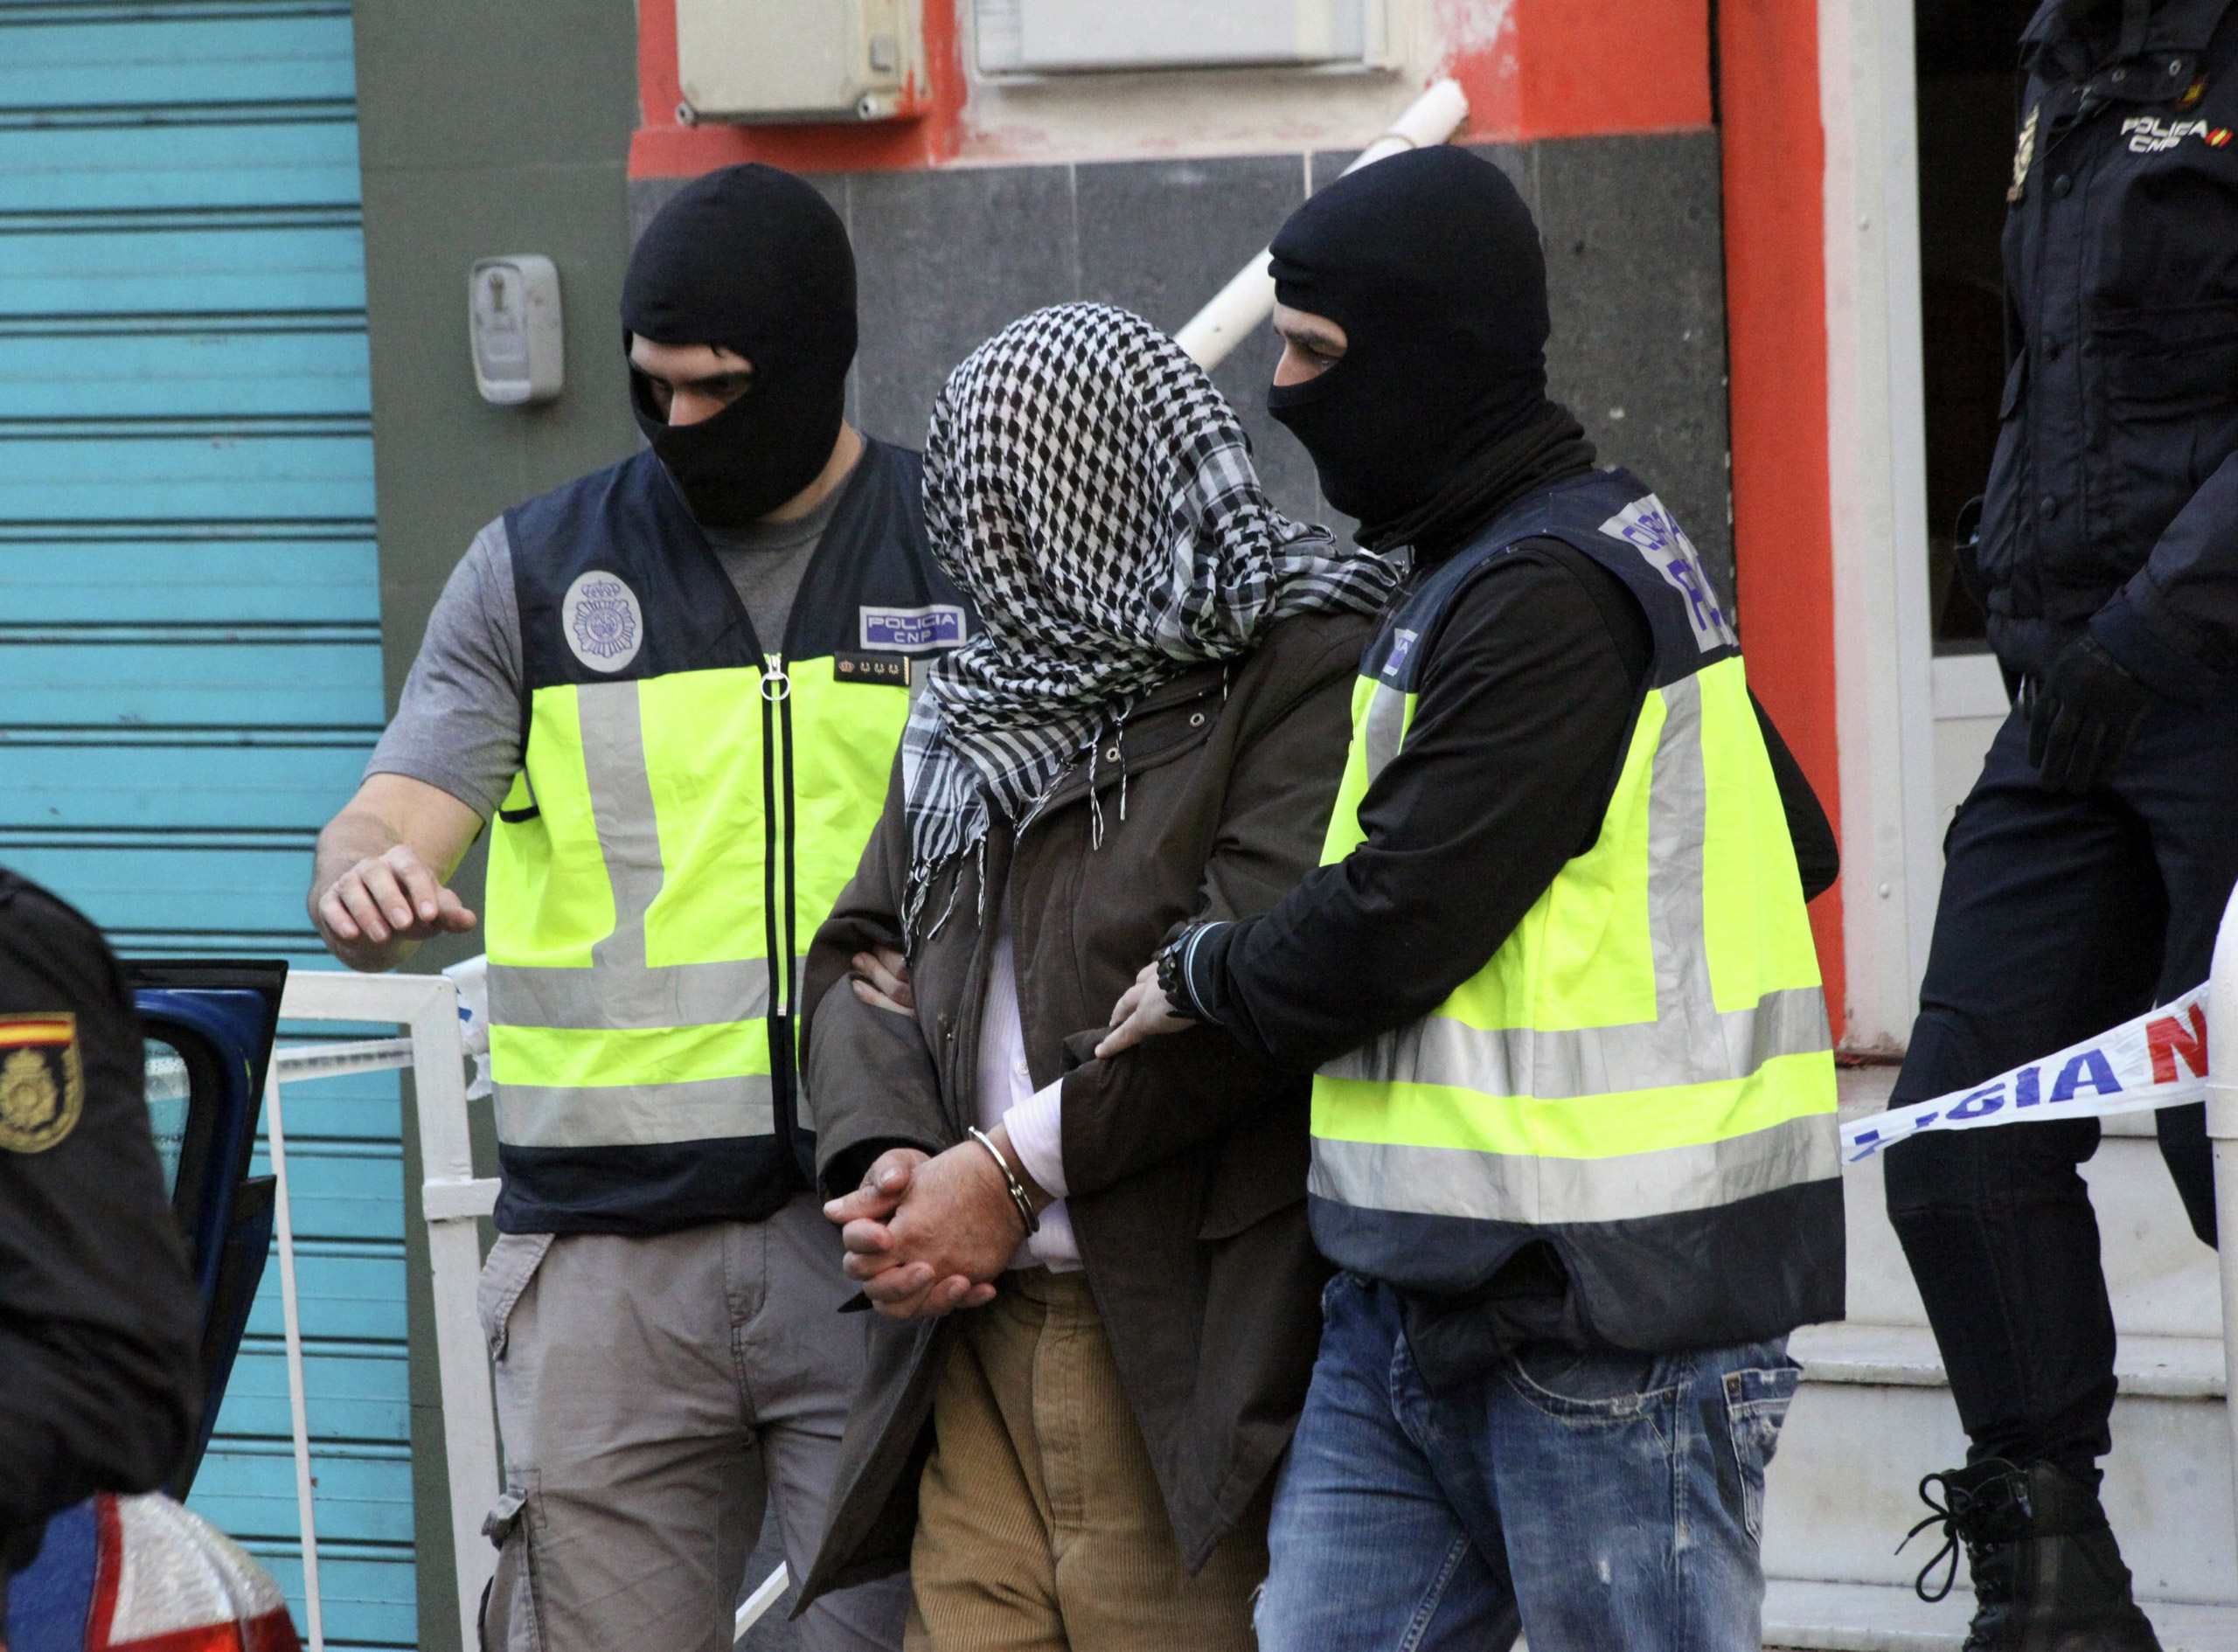 Spanish policemen escort a man who was arrested during a operation against Jihadist terrorism in Ceuta, Spanish enclave in northern Africa, on Feb. 7, 2016. (Reduan—EPA)